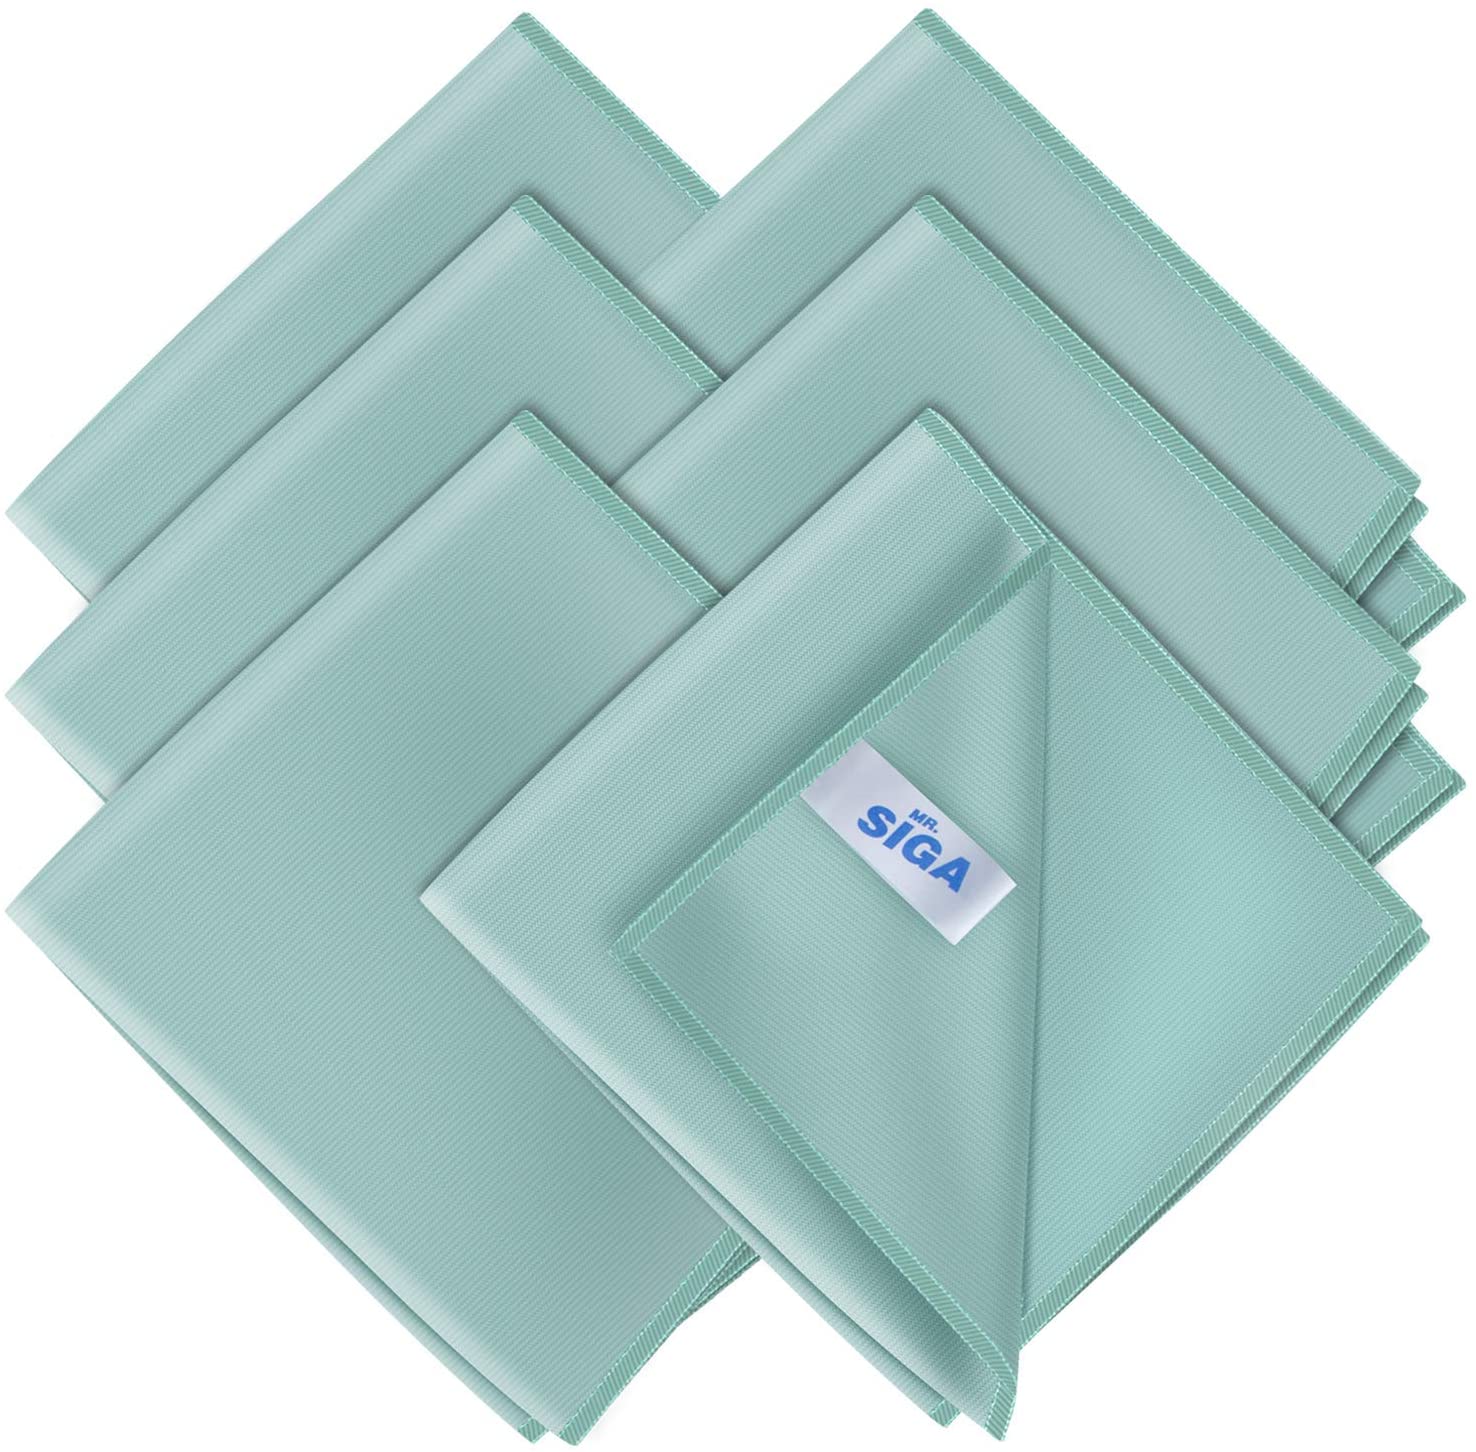 MR.Siga Ultra Fine Microfiber Cloths for Home, Car, and Glass,Pack of 6, 35 x 40 cm 13.7" x 15.7" - image 1 of 8